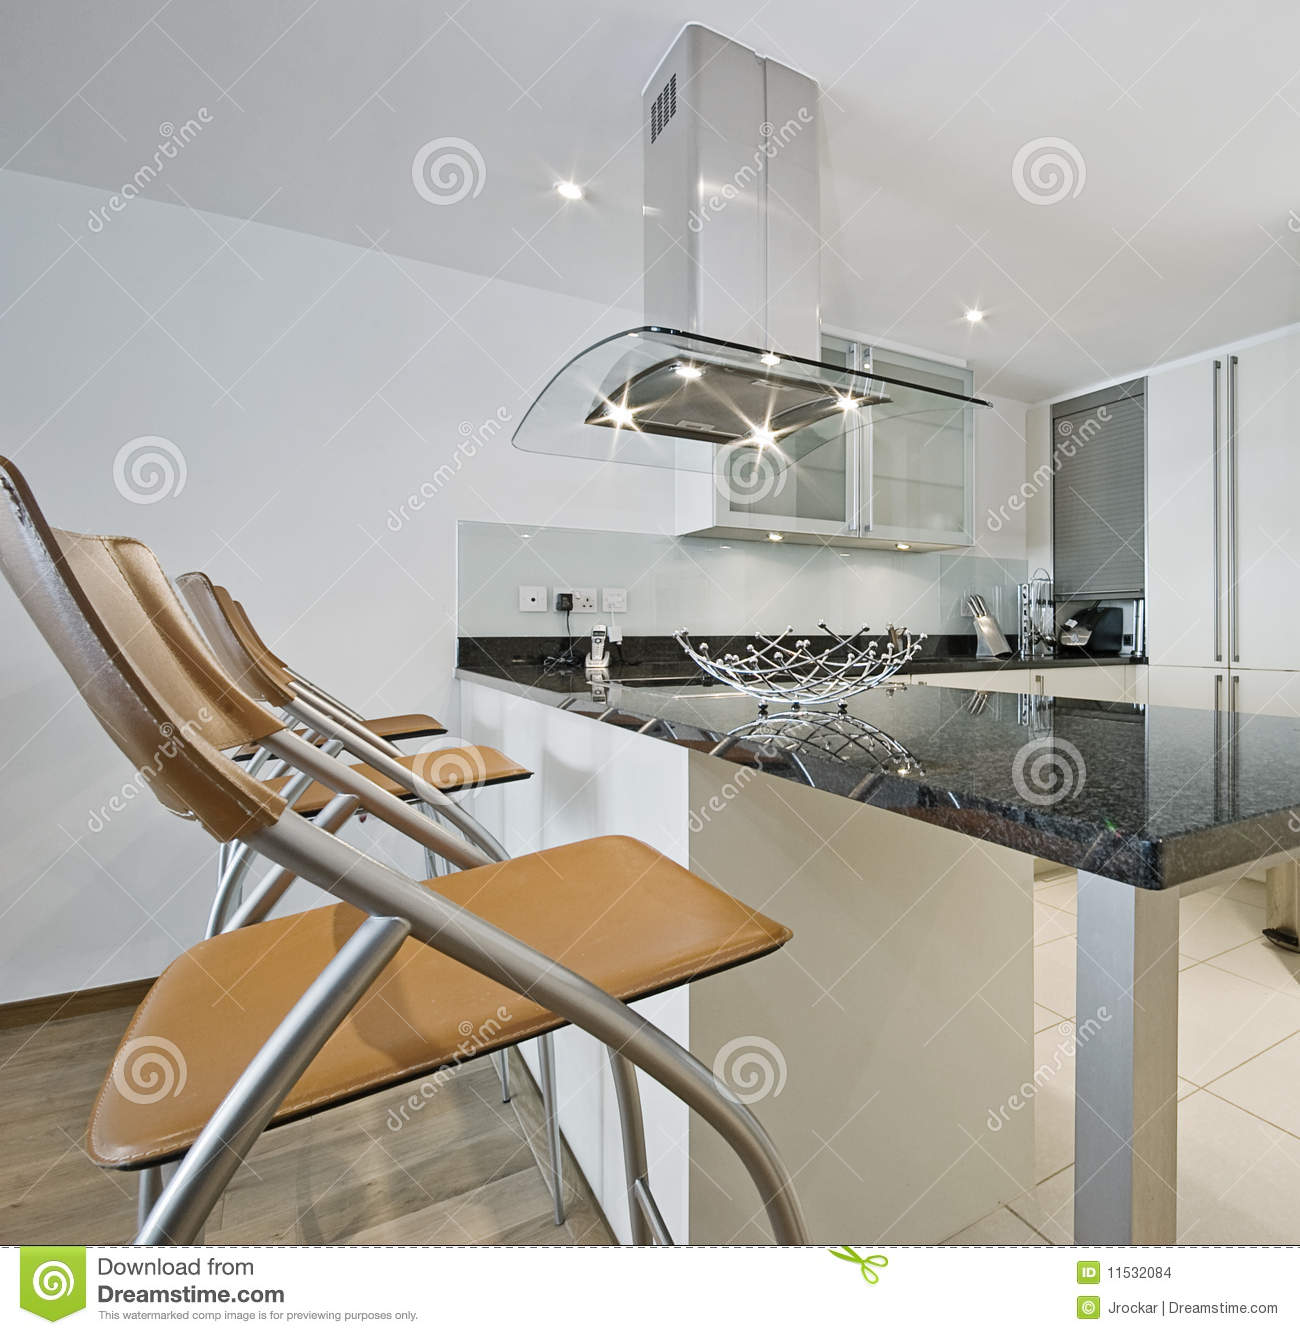 Open Plan Kitchen With Breakfast Bar Stock Images   Image  11532084